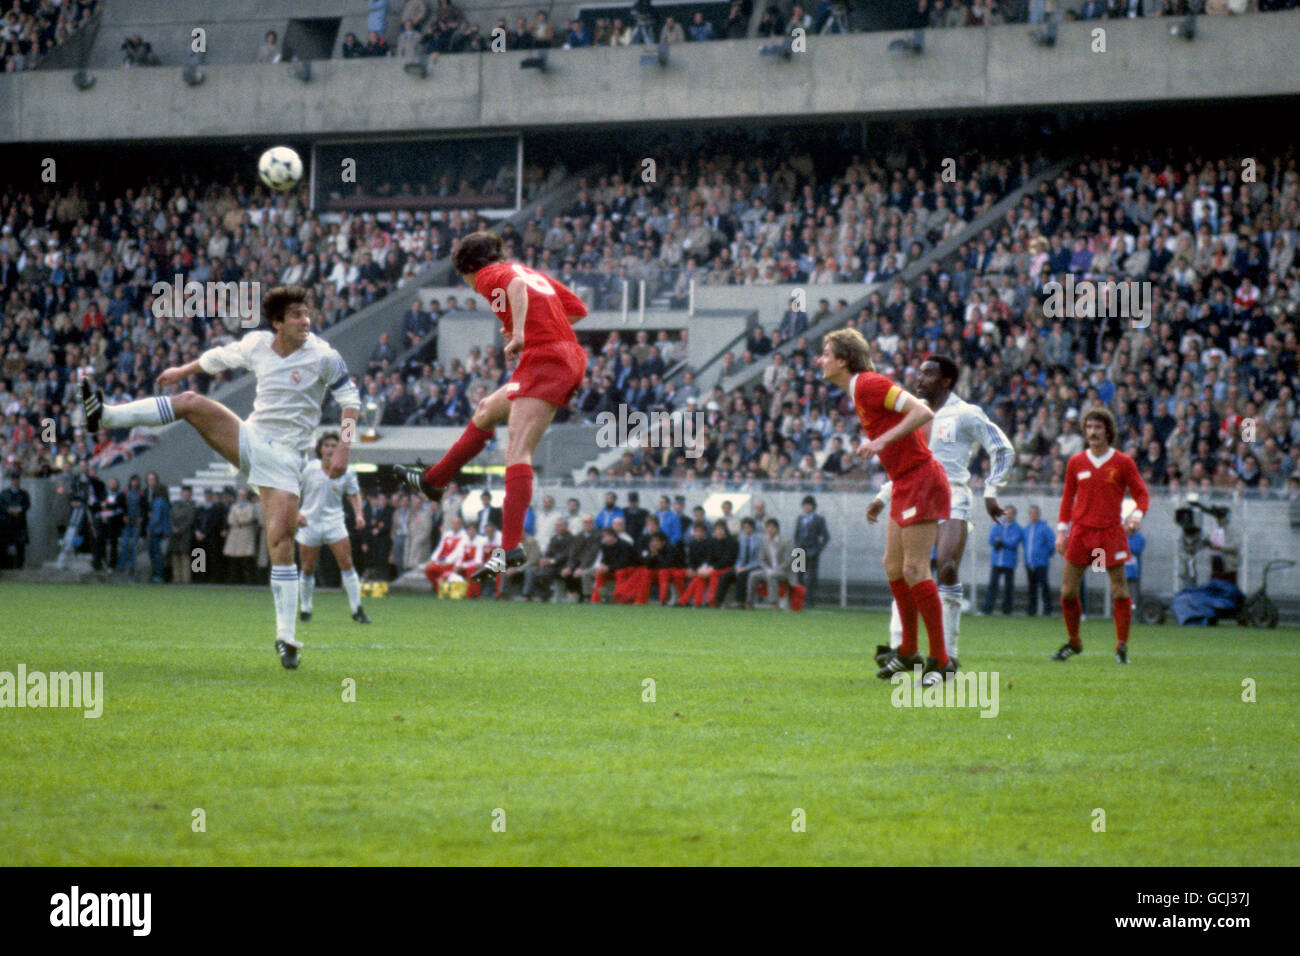 Liverpool's Alan Hansen clears the ball with a header. (l-r) Santillana (Real Madrid), Alan Hansen, Phil Thompson (both Liverpool), Real Madrid's Englishman Laurie Cunningham and Liverpool's Terry McDermott (far right) Stock Photo